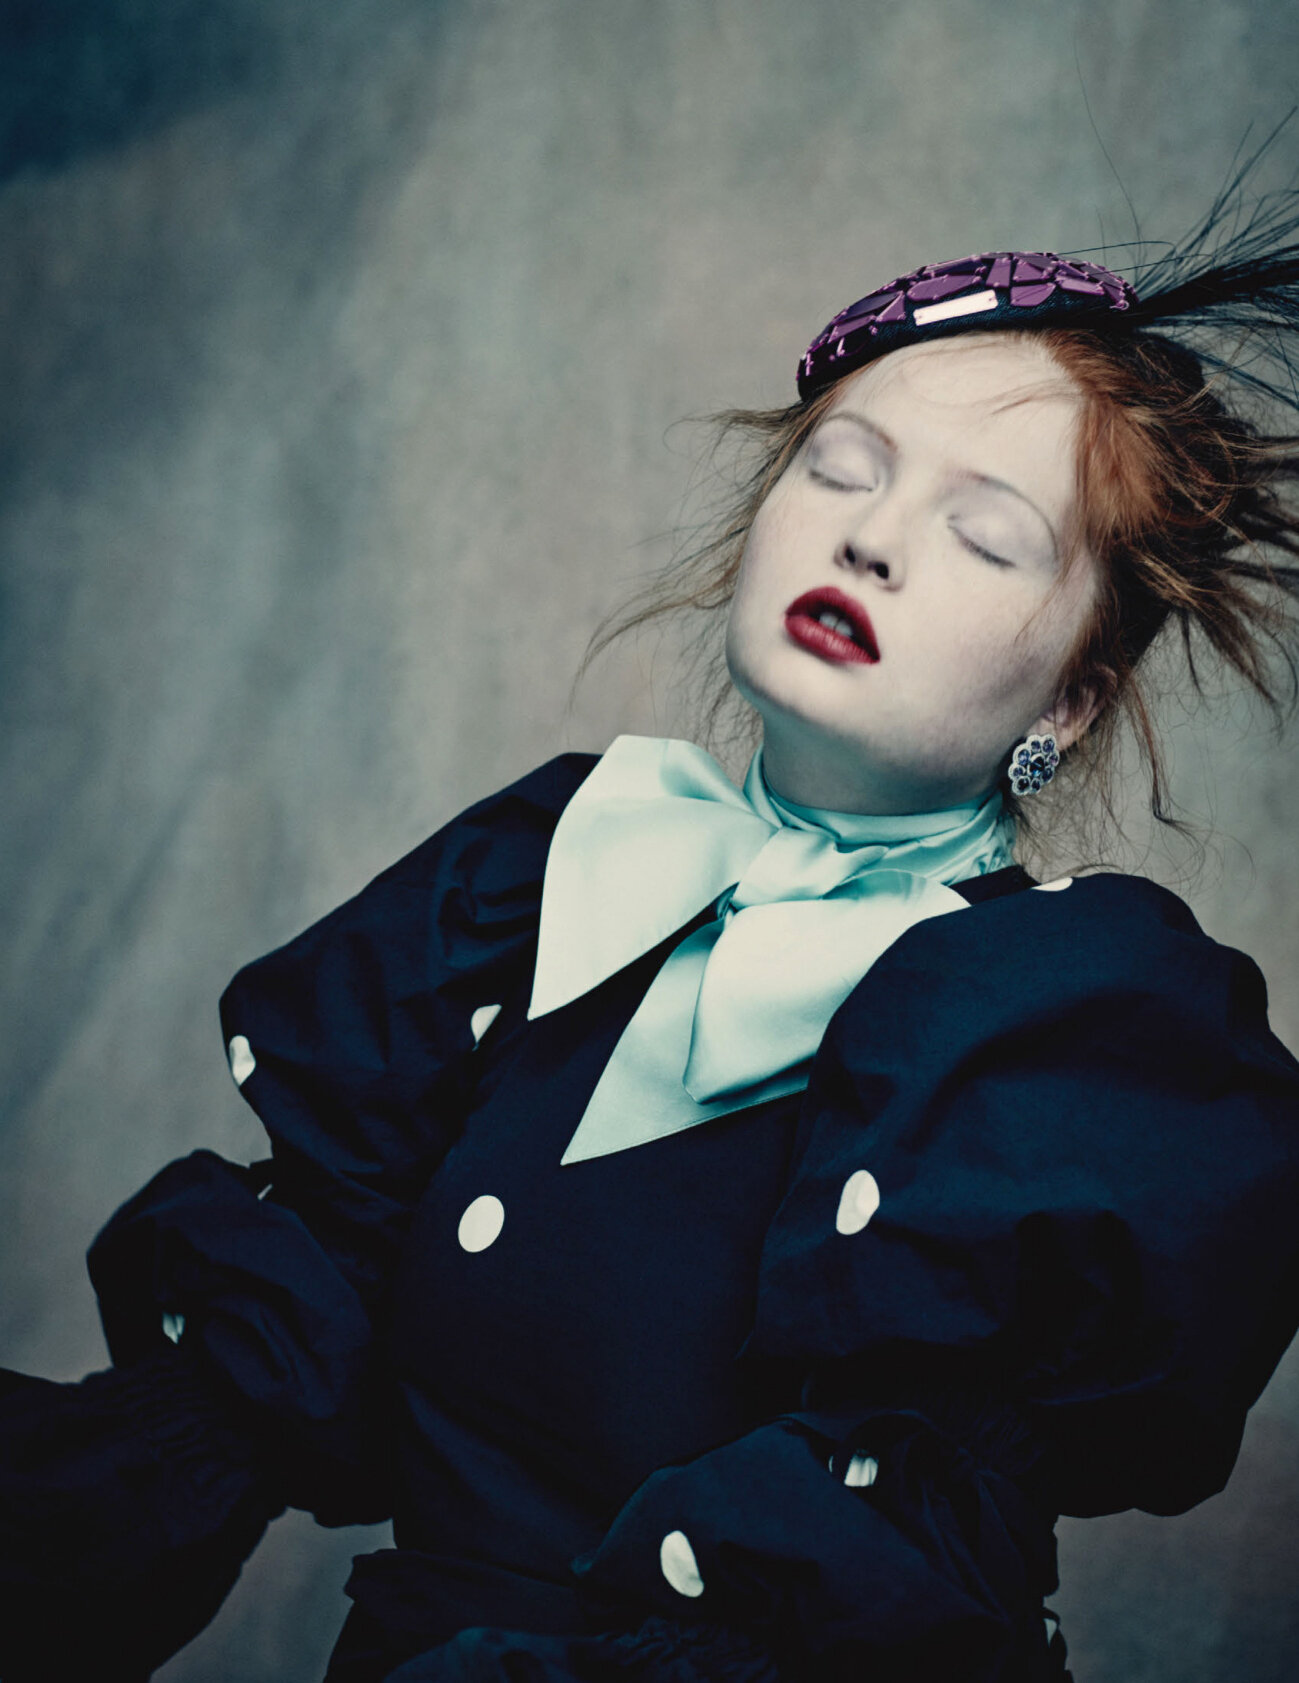 Paolo Roversi for Vogue UK June 2020 (11).jpg